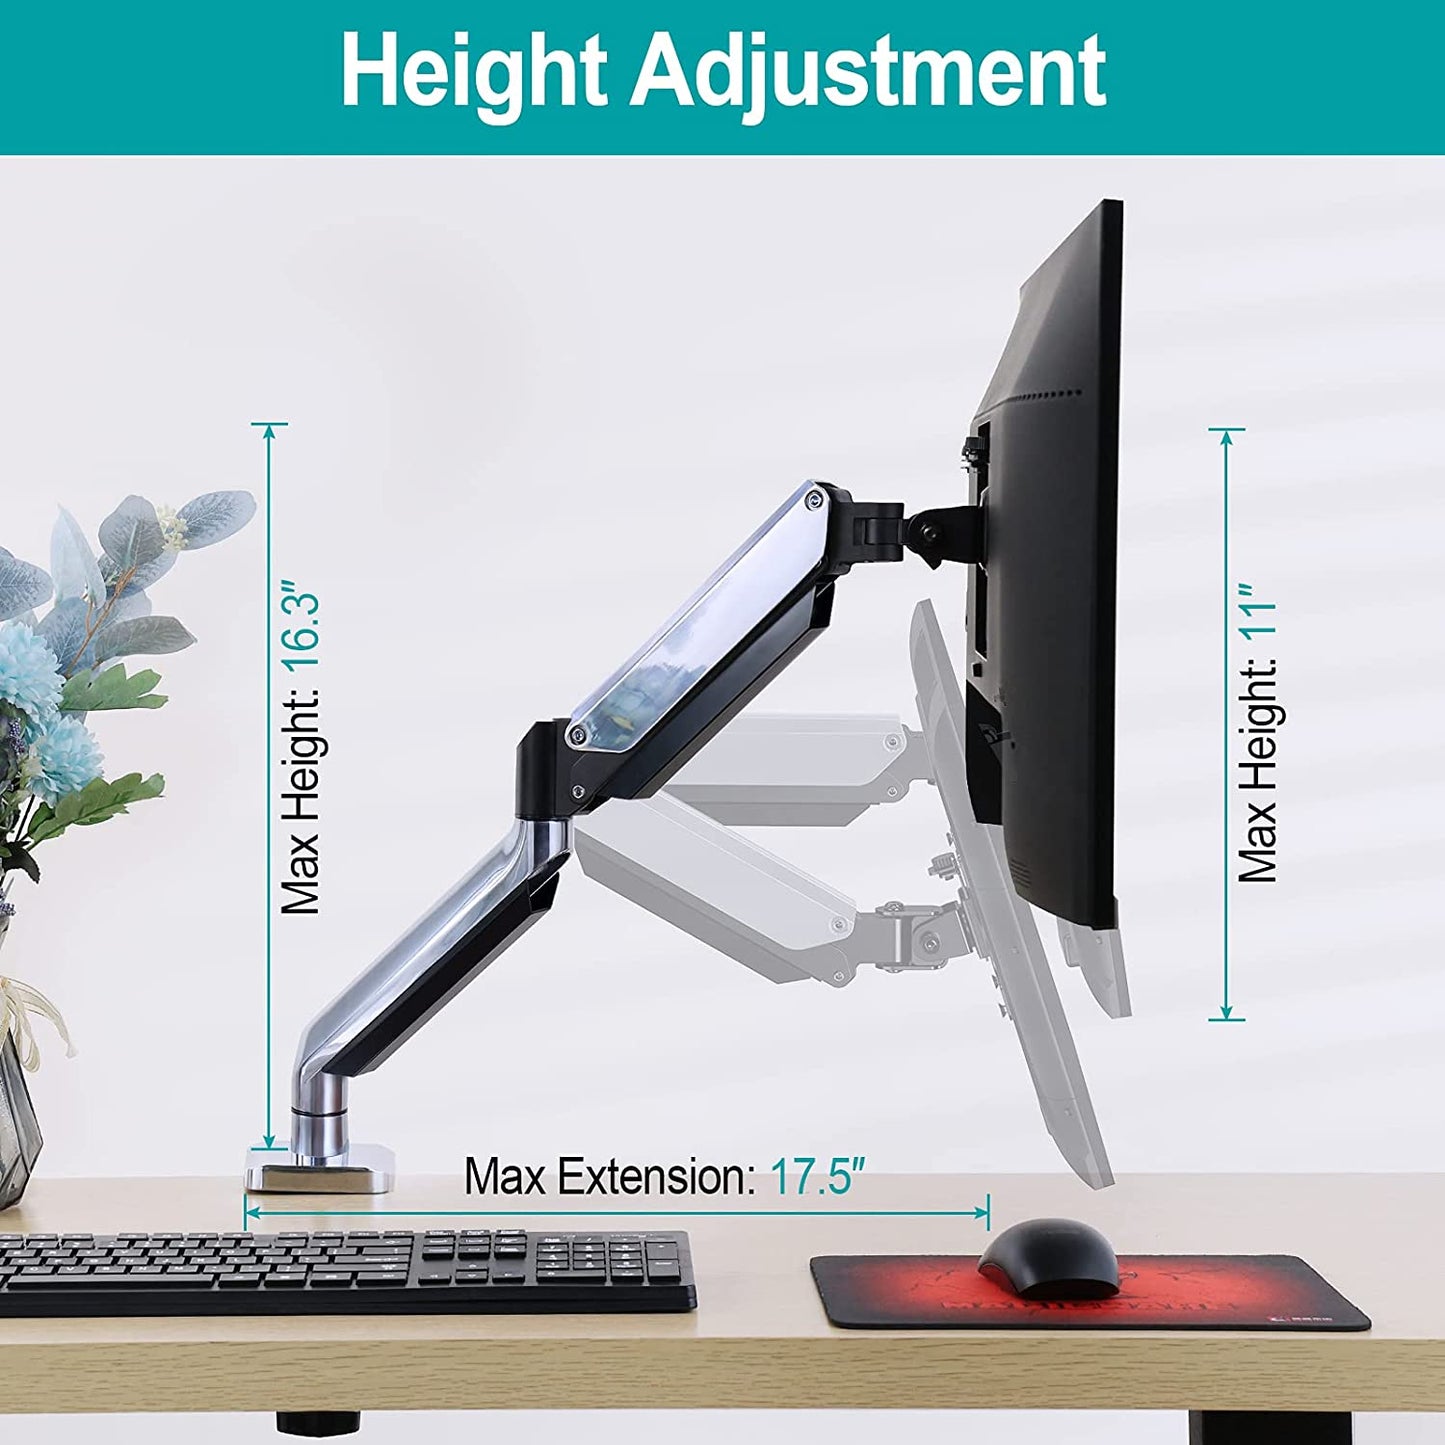 Single Arm height adjustable monitor arm with 17.5'' max extension